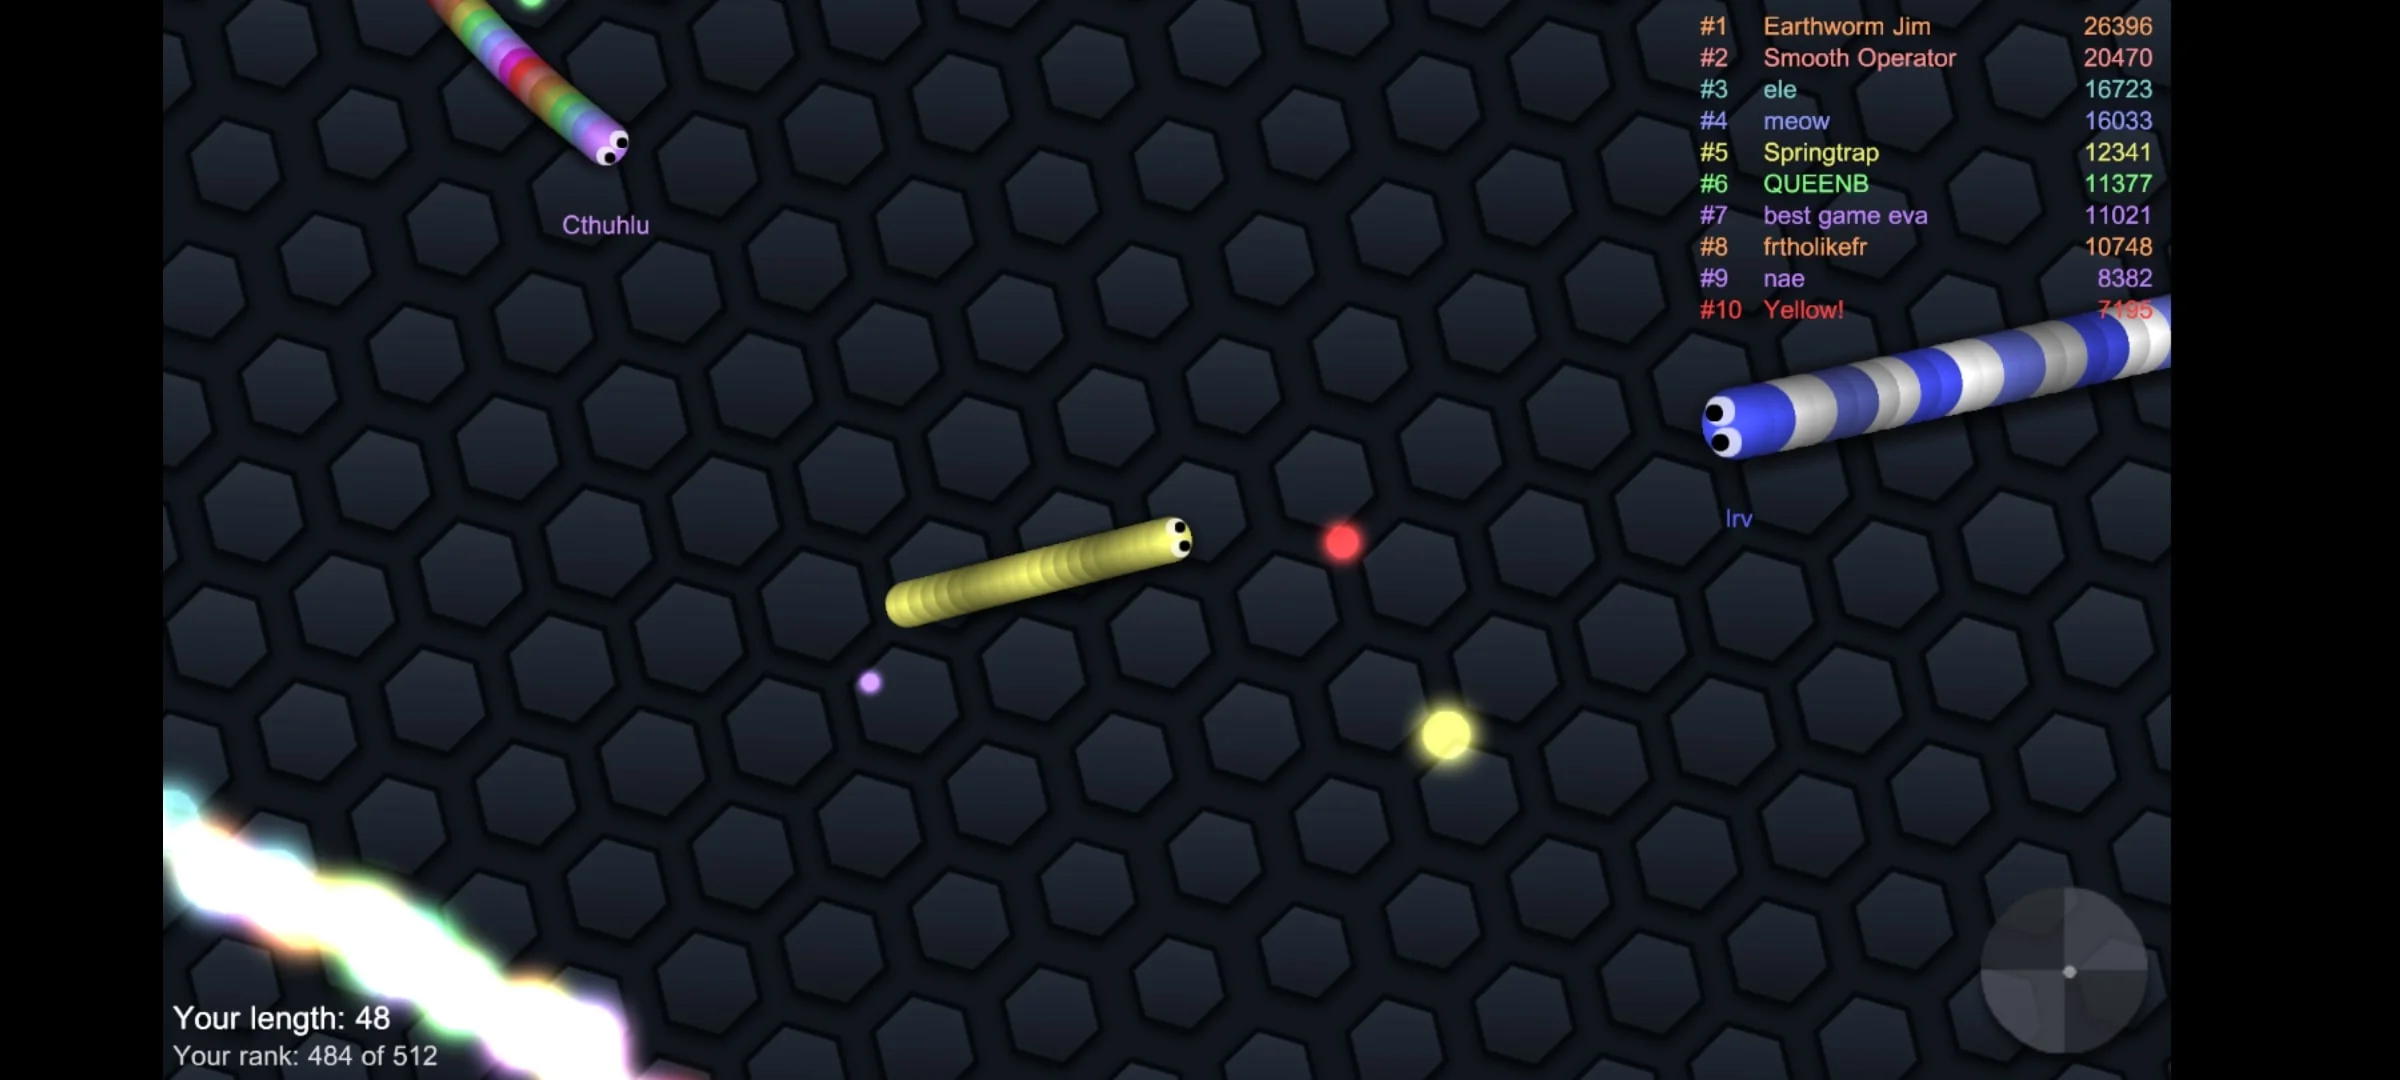 Slither.io MOD APK V1.8.5 Unlimited Life, Invisible Skin